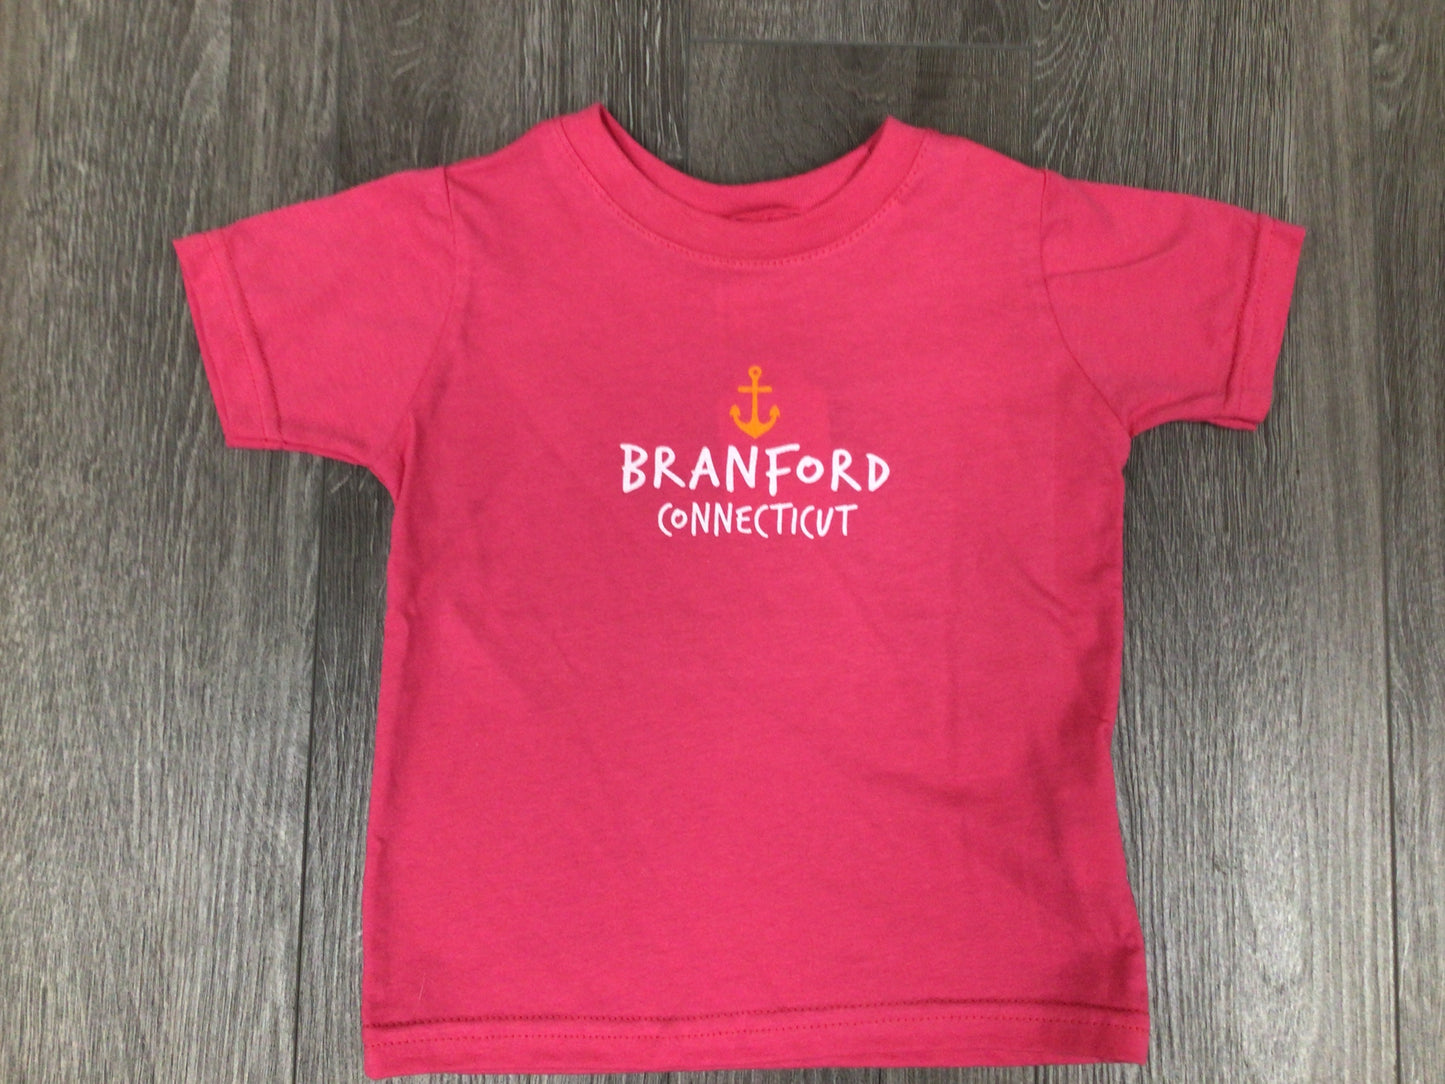 Branford Connecticut toddler t-shirts in hot pink. Sizes available for 6 months, 12 months, 18 months, 2T, 3T, and 4T.